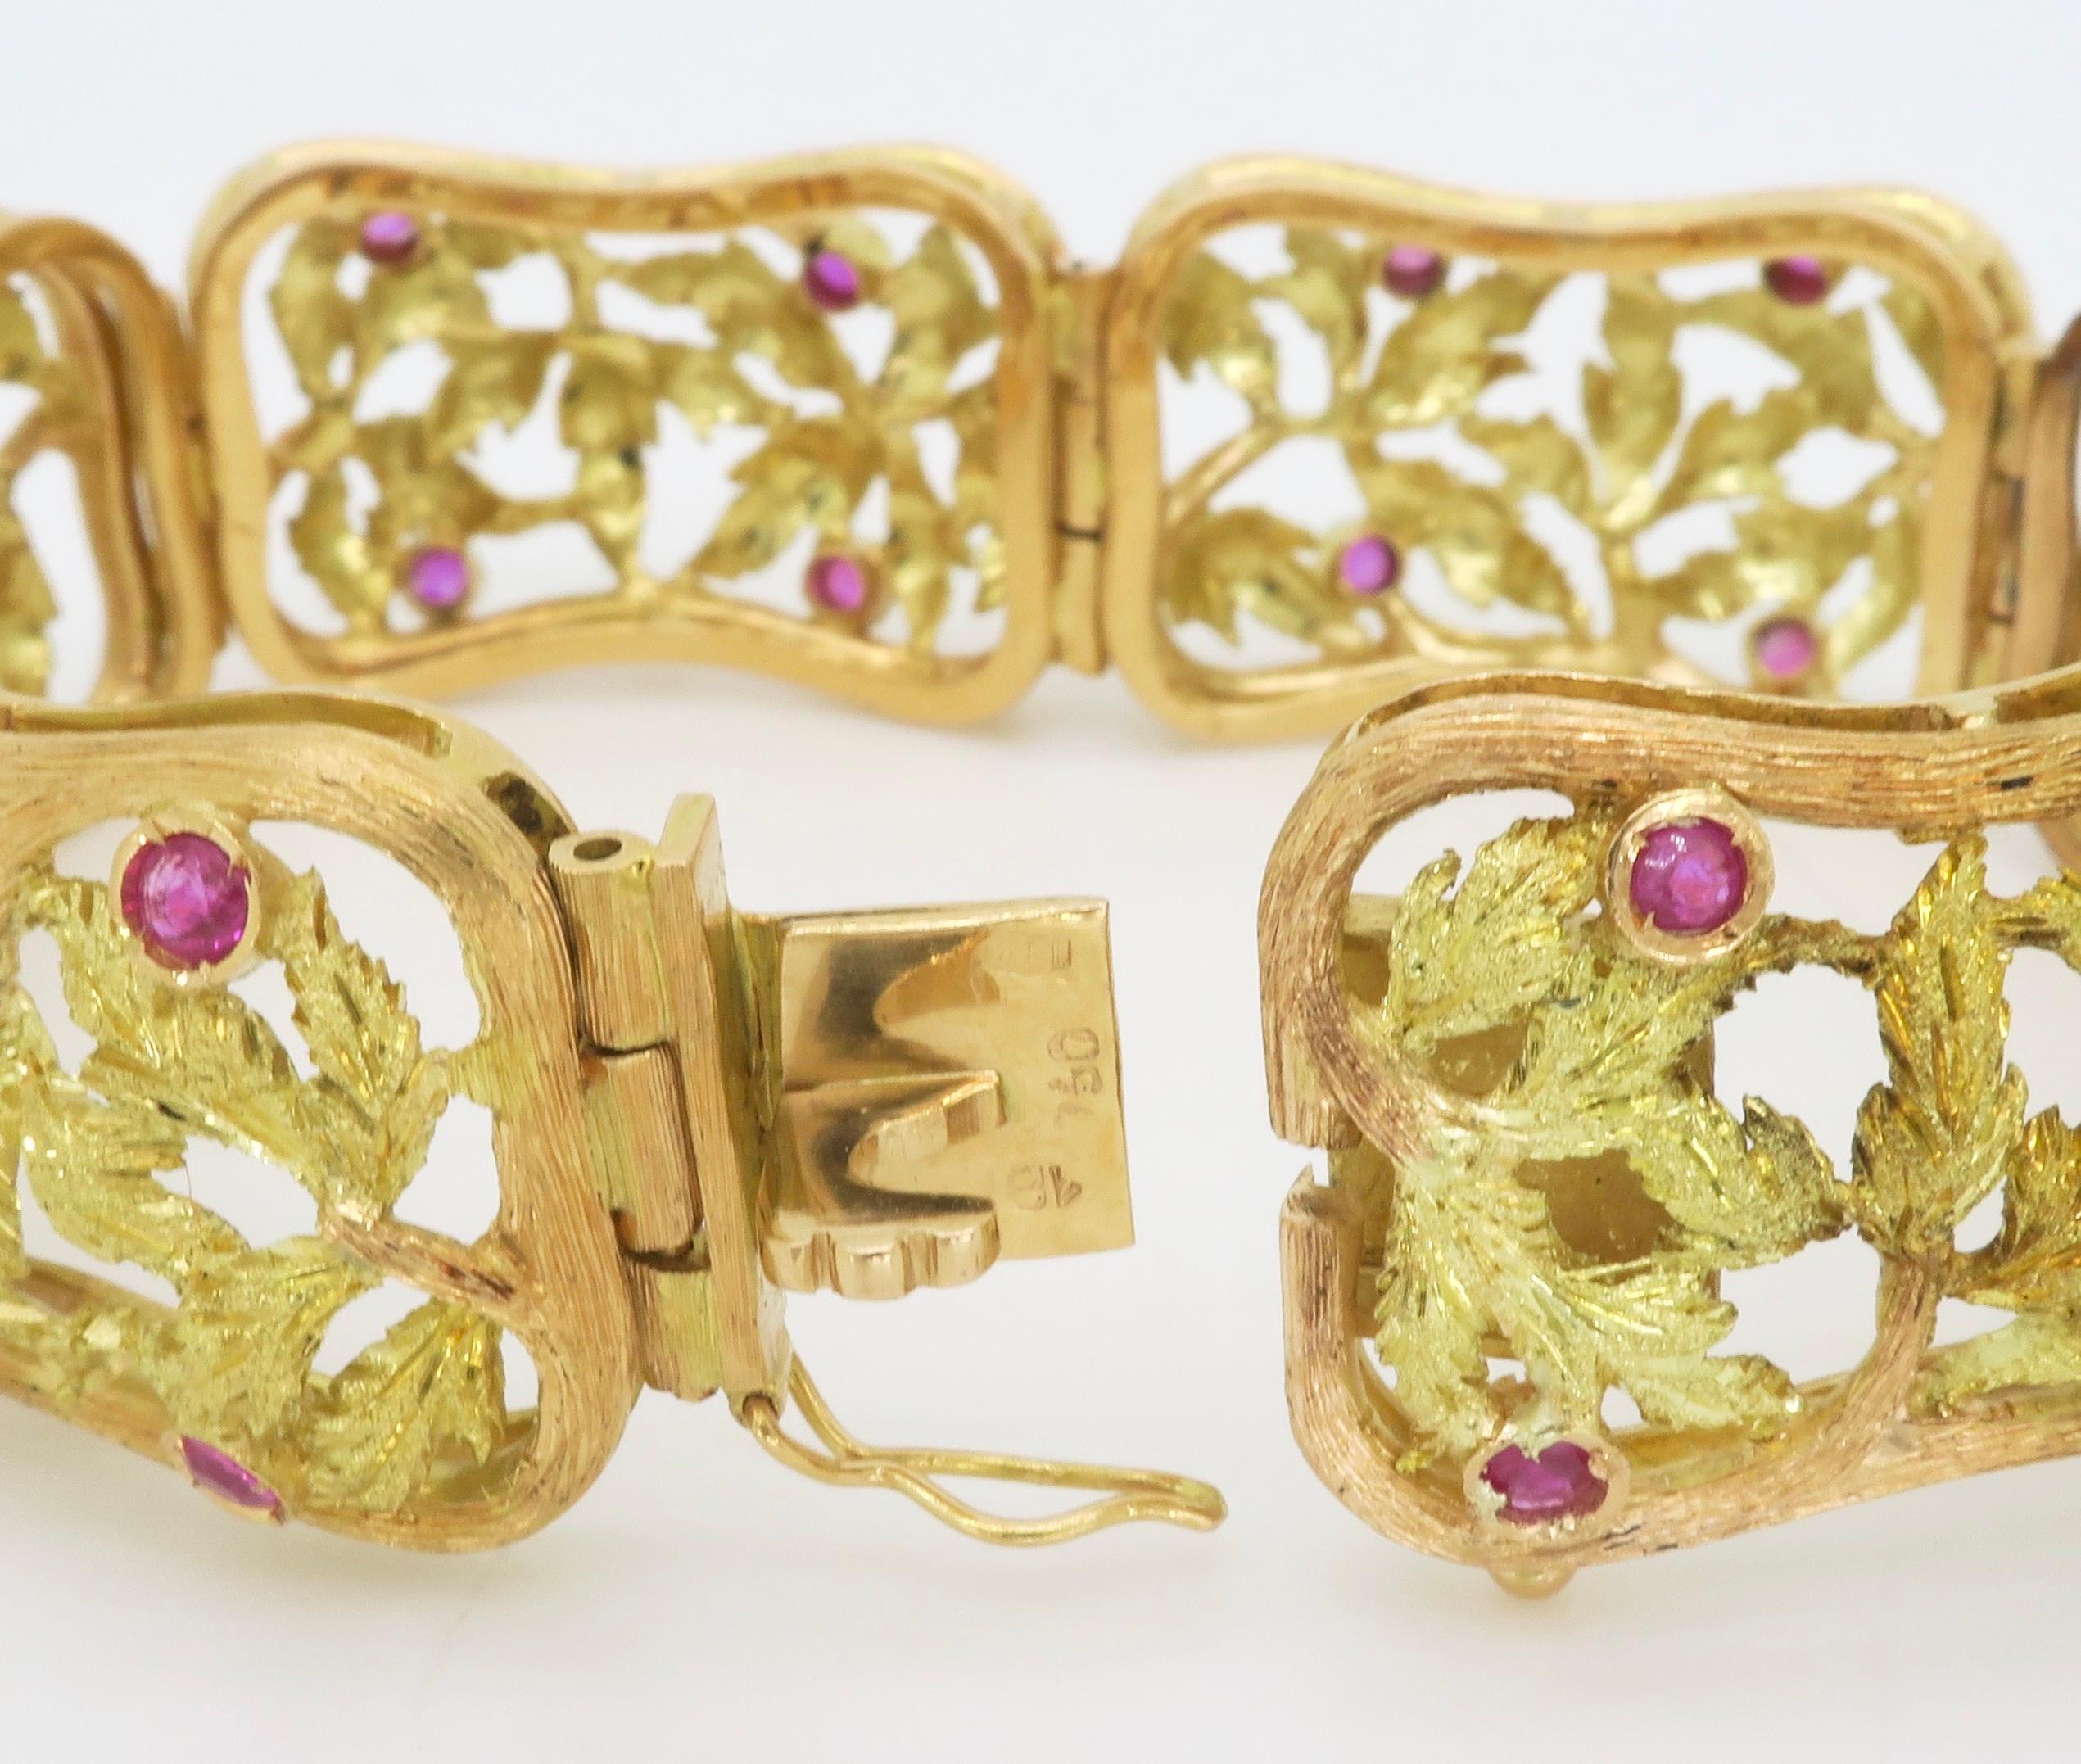 Women's Impressive Yellow & Green Gold Bracelet Crafted with Rubies